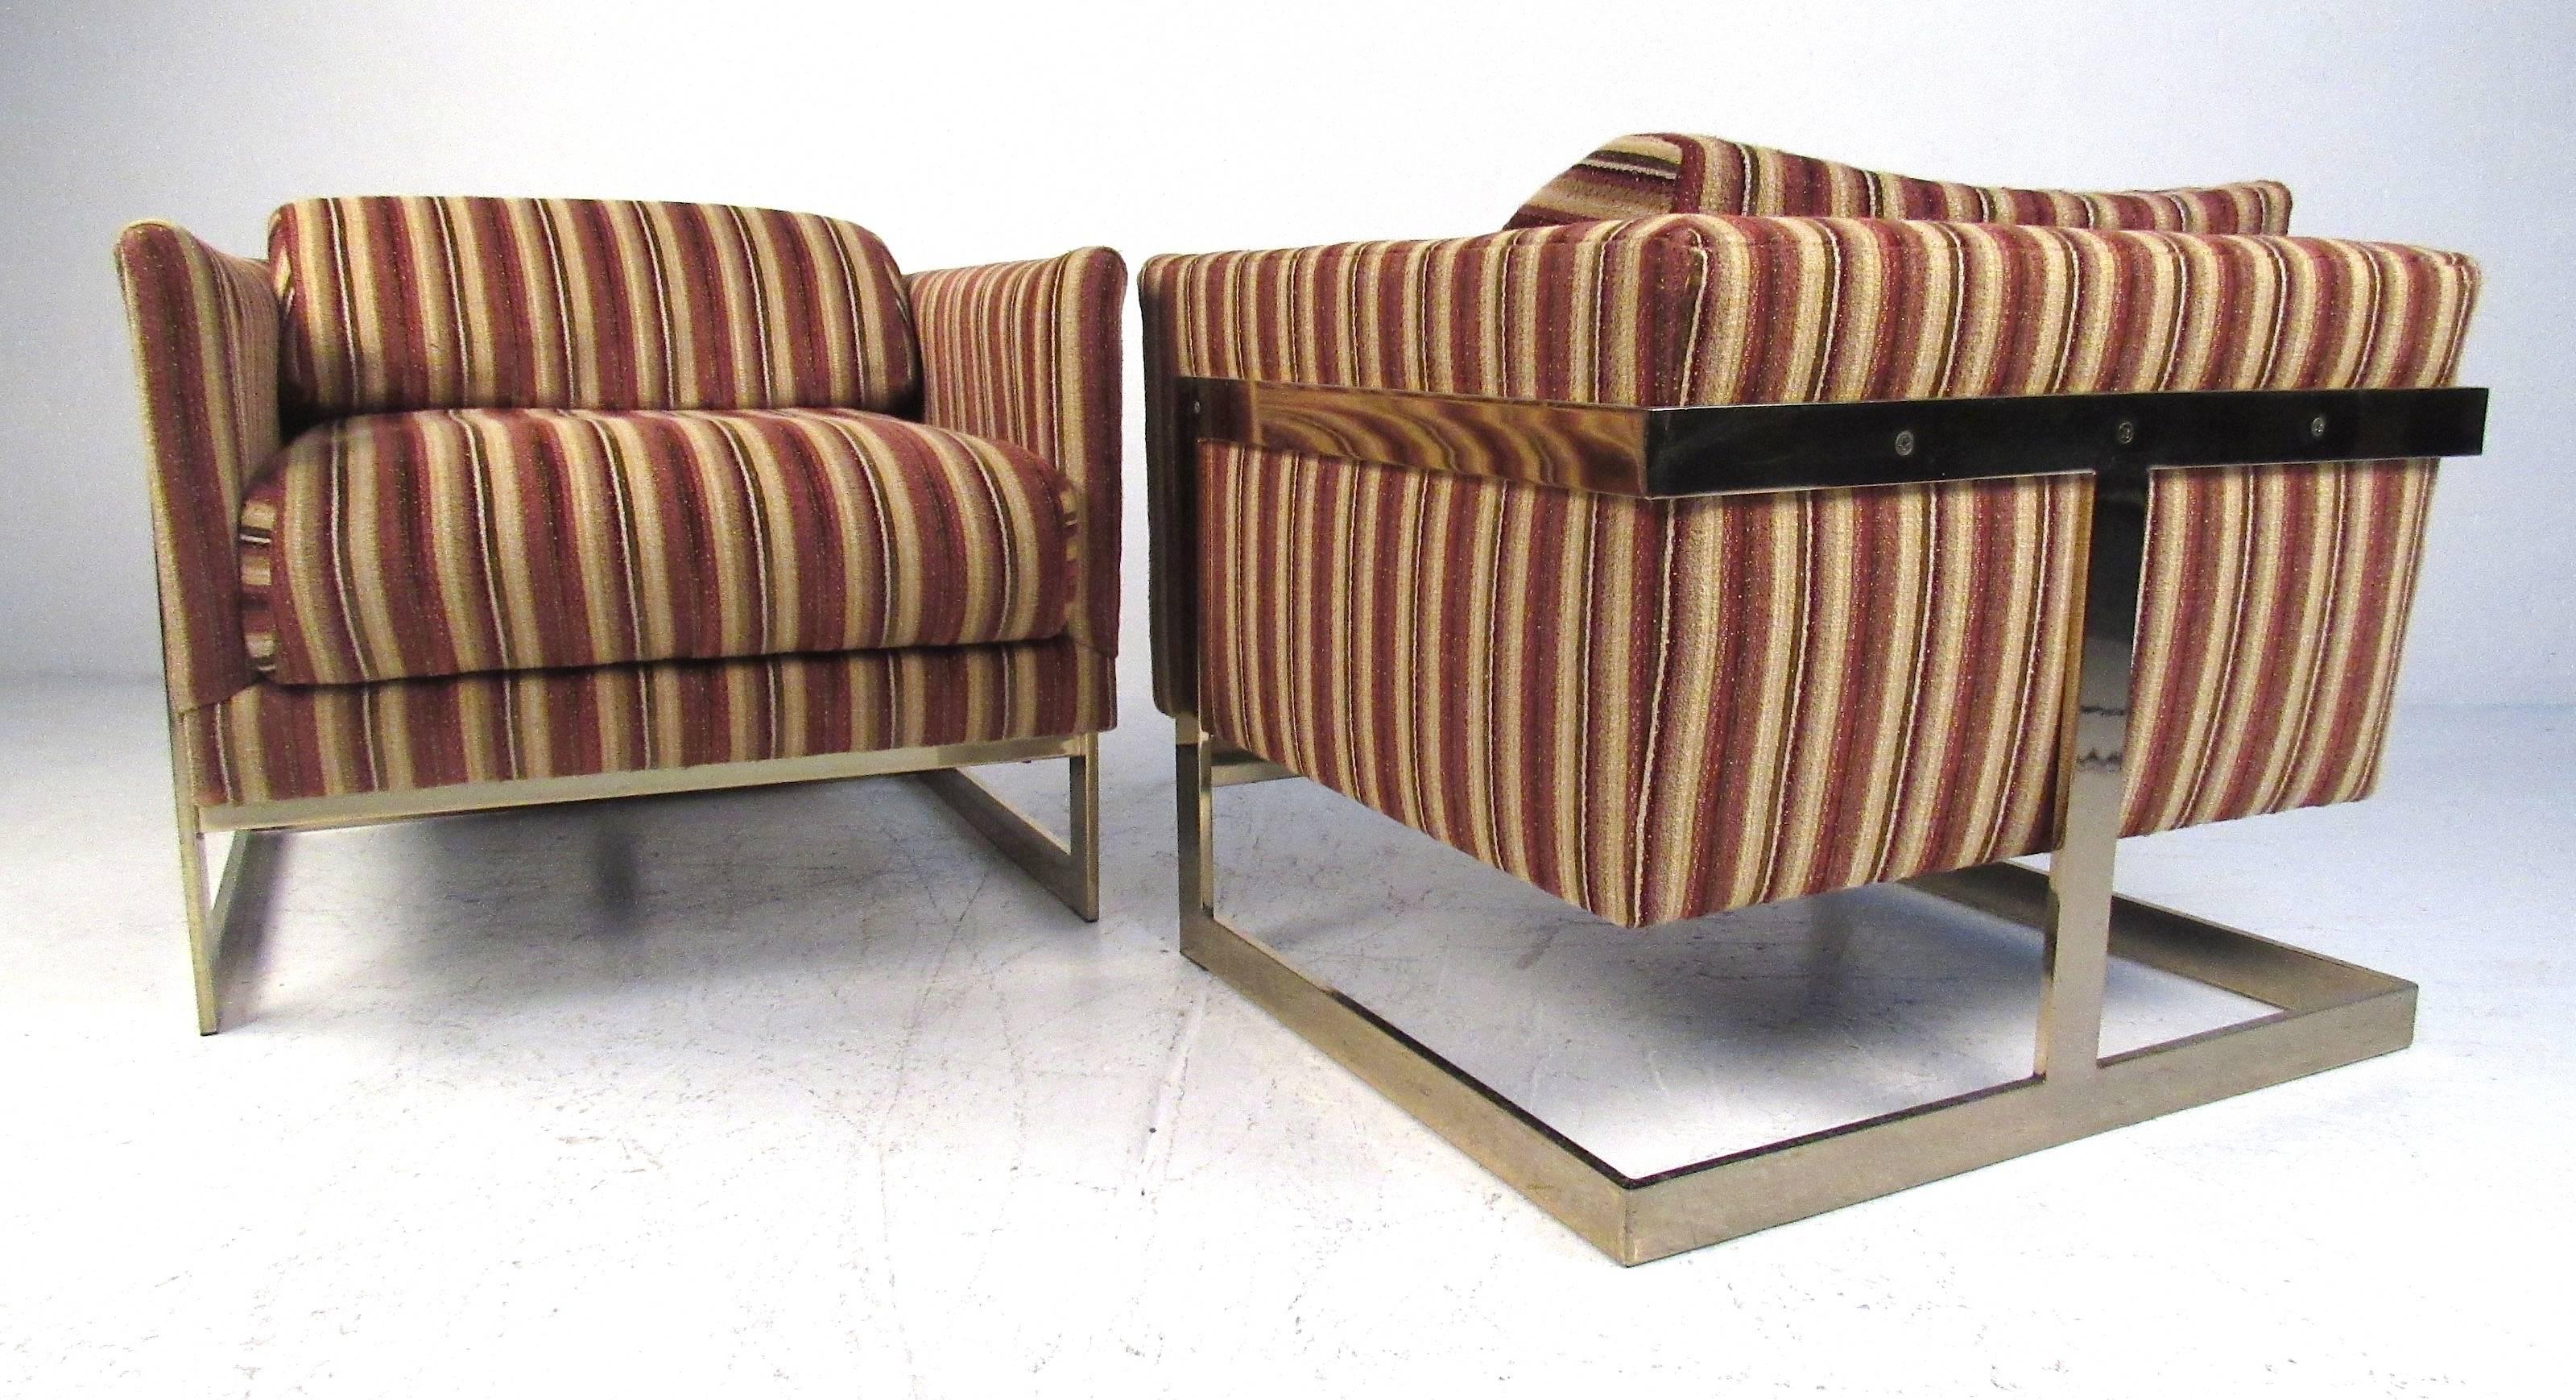 Pair of mid-century cantilevered lounge chairs with brass frames and bold striped upholstery by Milo Baughman for Thayer Coggin. Please confirm item location (NY or NJ) with dealer.